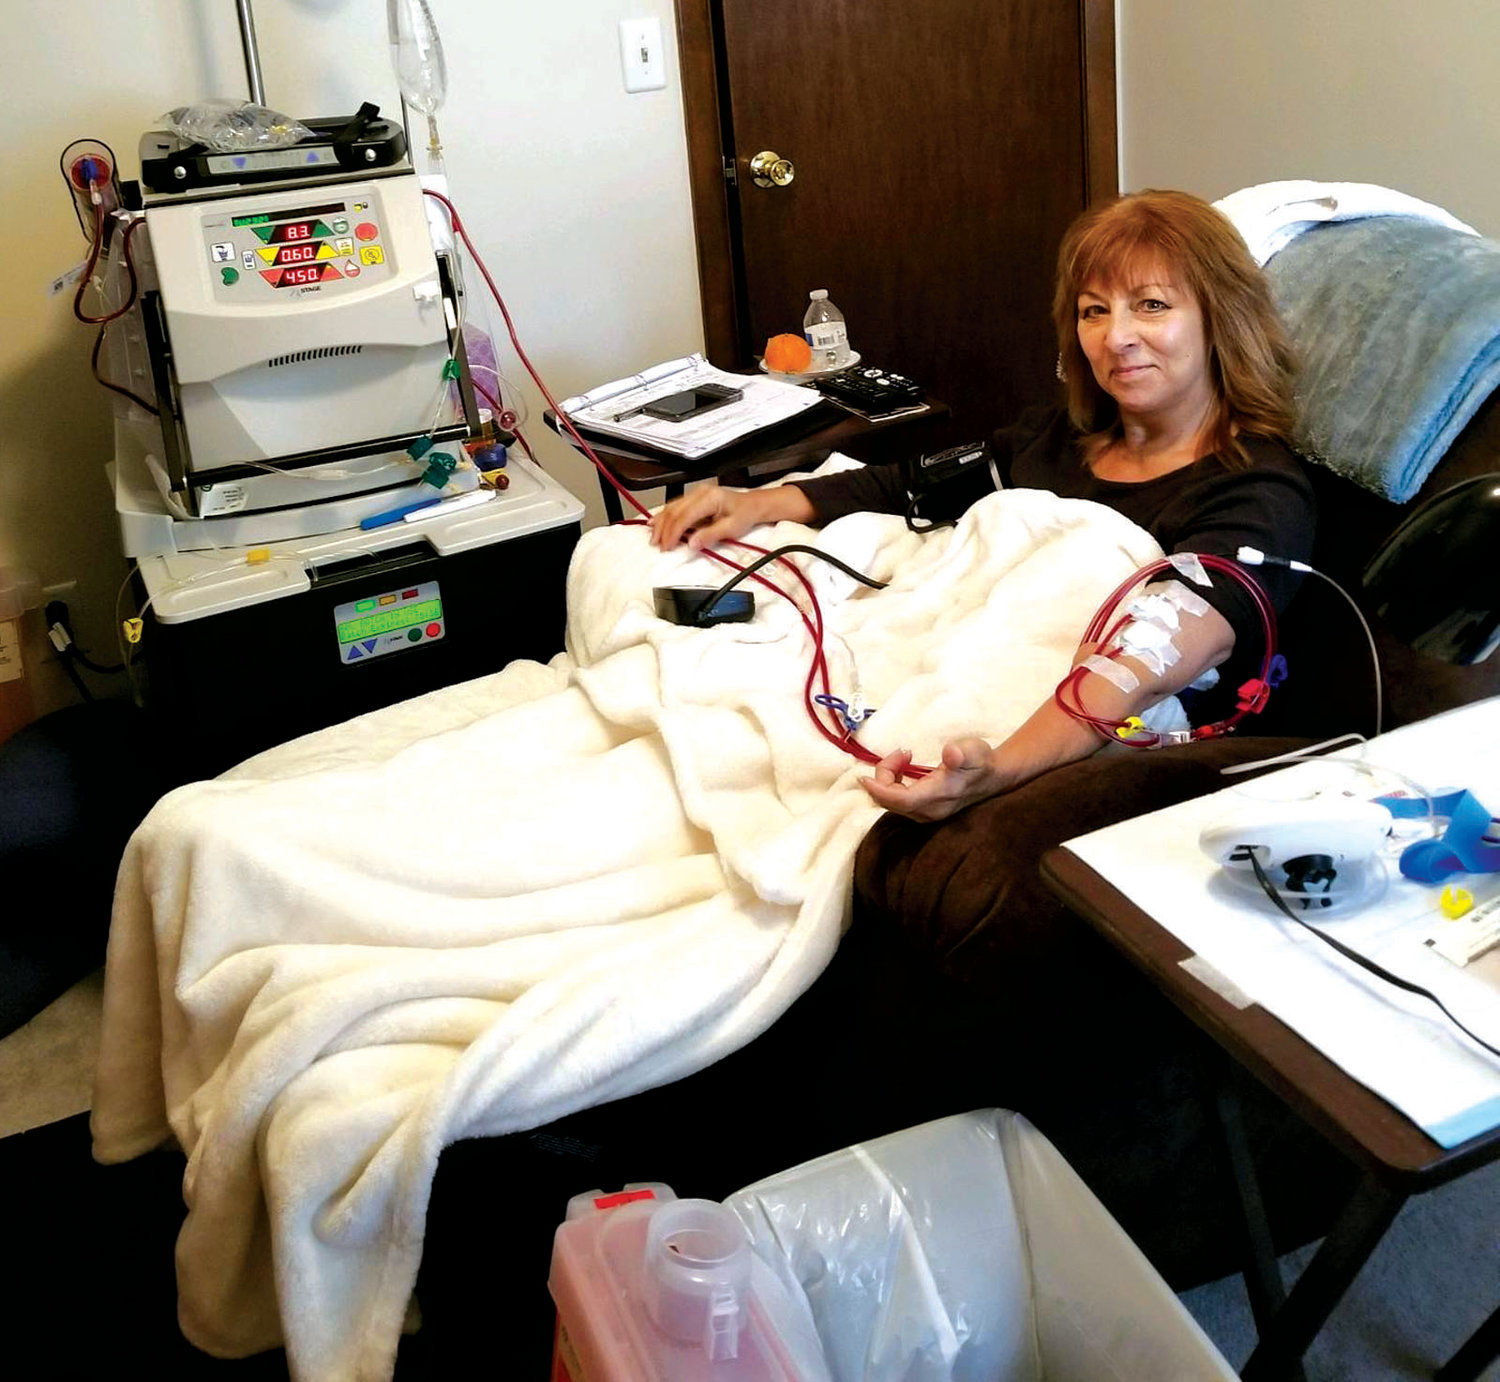 WINNING THE FIGHT: Warwick native and former body builder Sue Flesia undergoes dialysis treatment at her home using an NxStage machine.